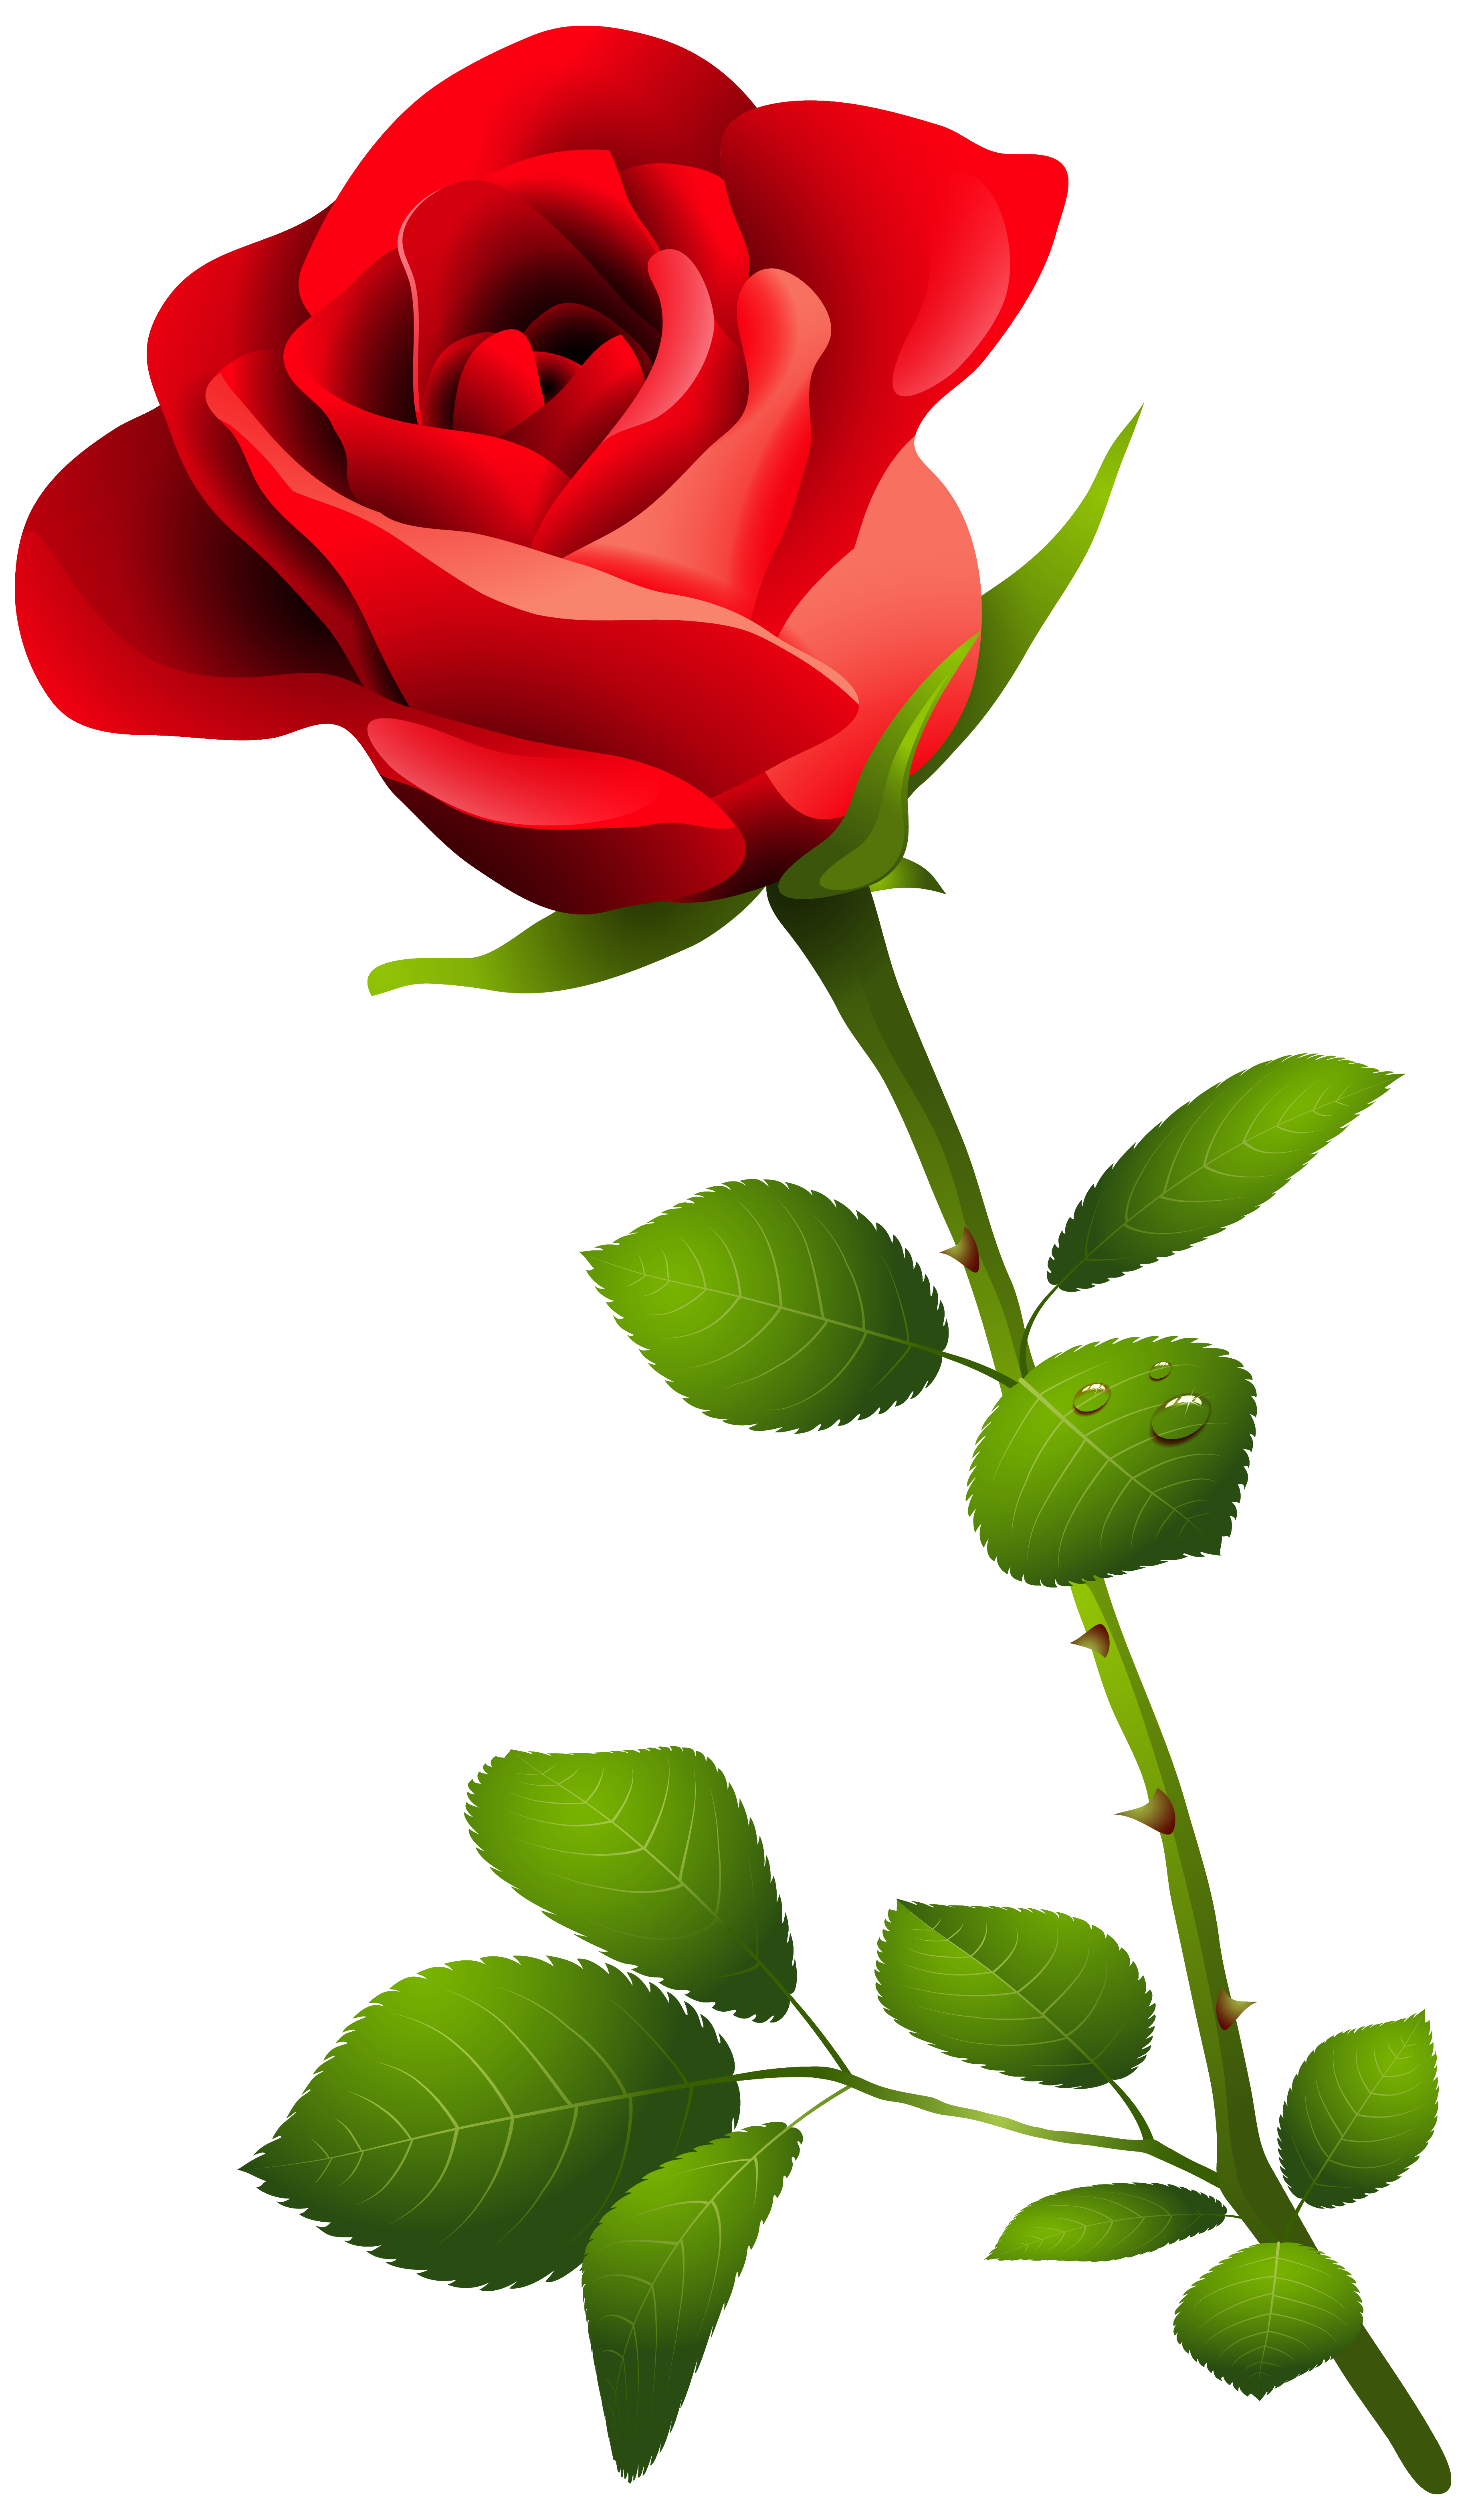 With stem png image. Clipart roses red rose